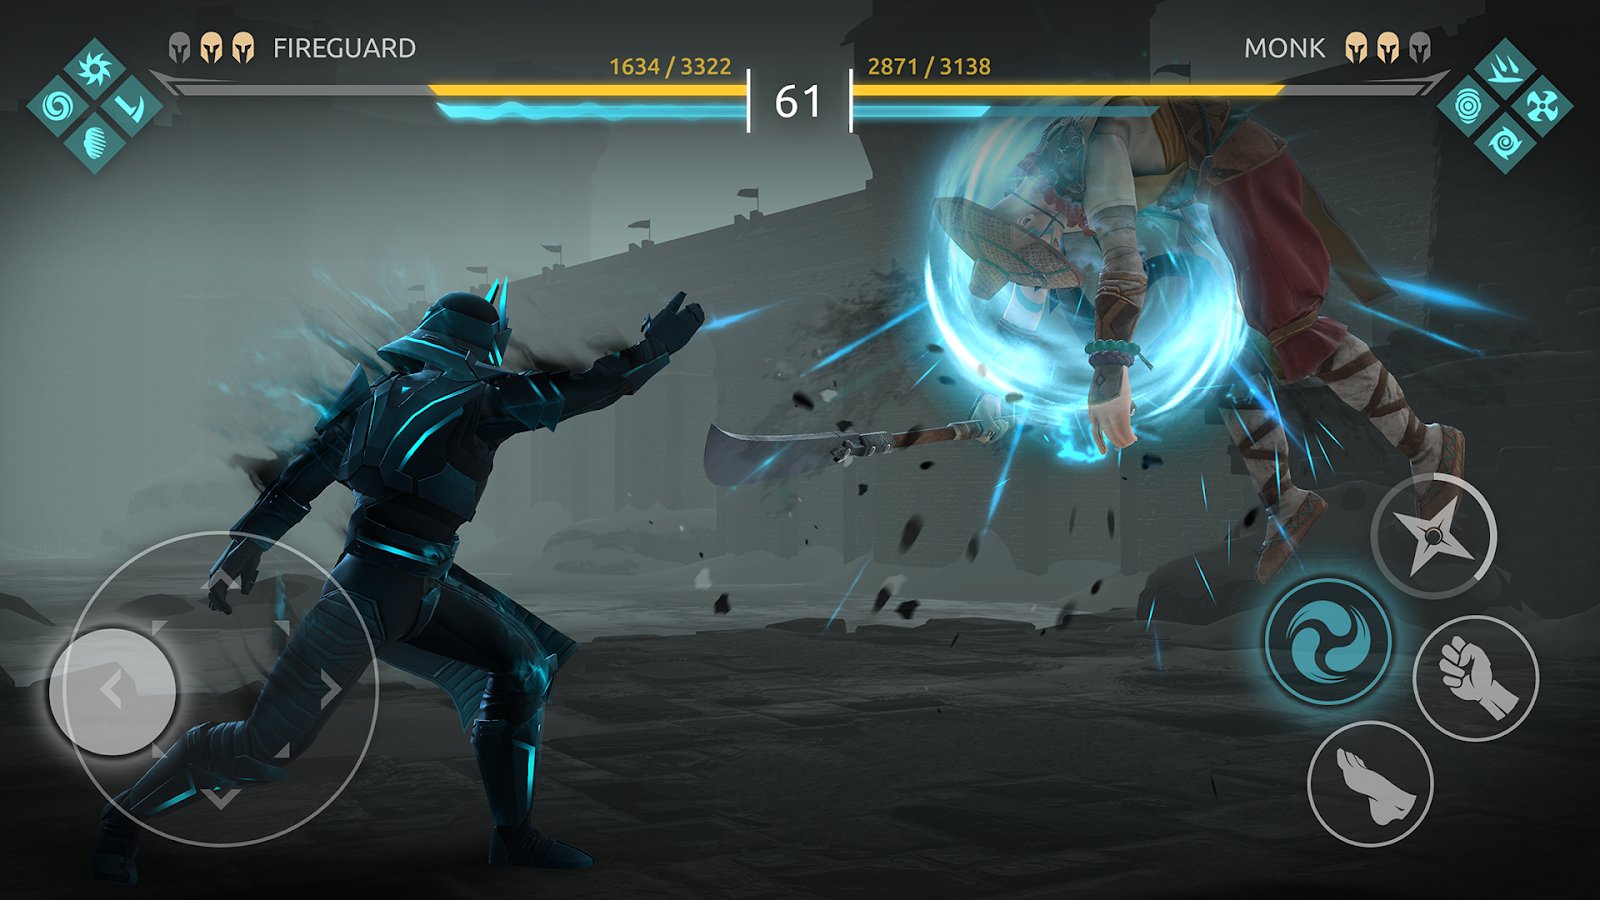 free download shadow fight 4 arena